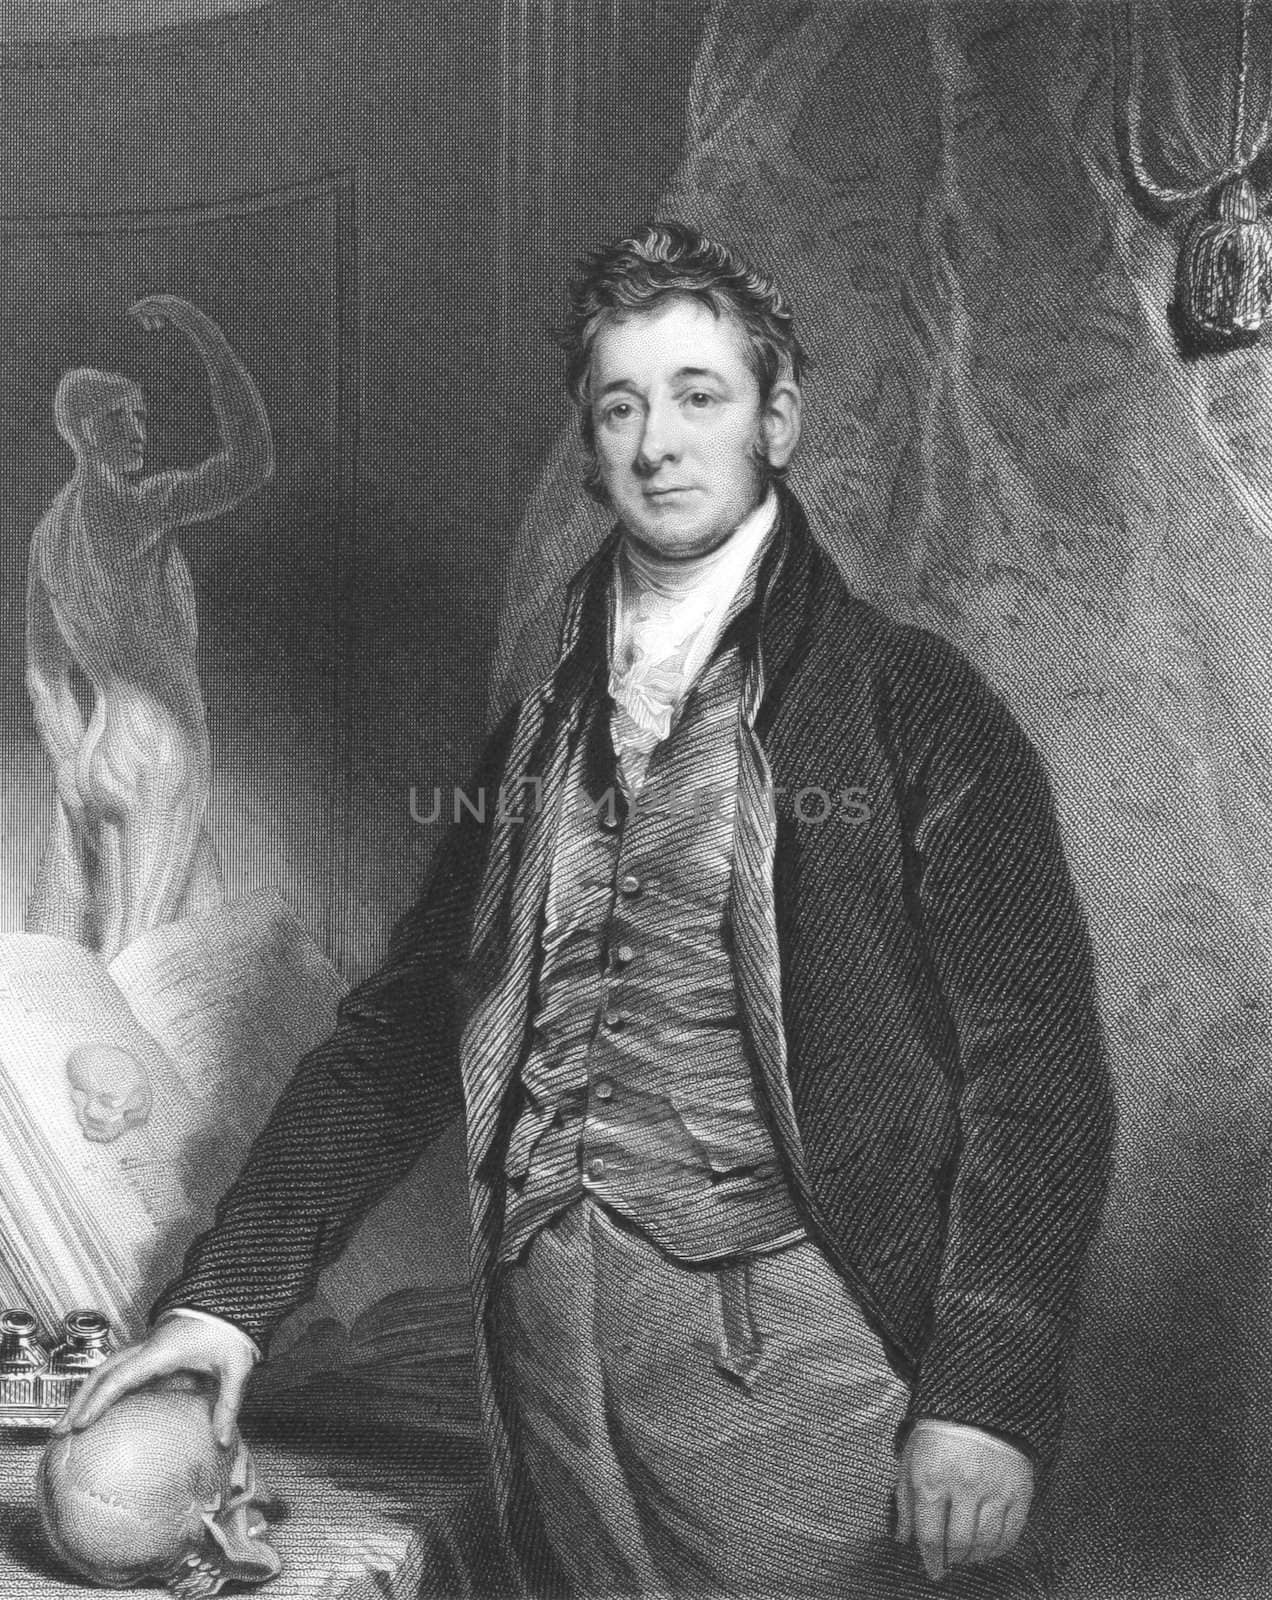 Anthony Carlisle (1768-1842) on engraving from the 1800s. English surgeon. Engraved by H.Robinson and published in London by Fisher, Son & Co in 1838.